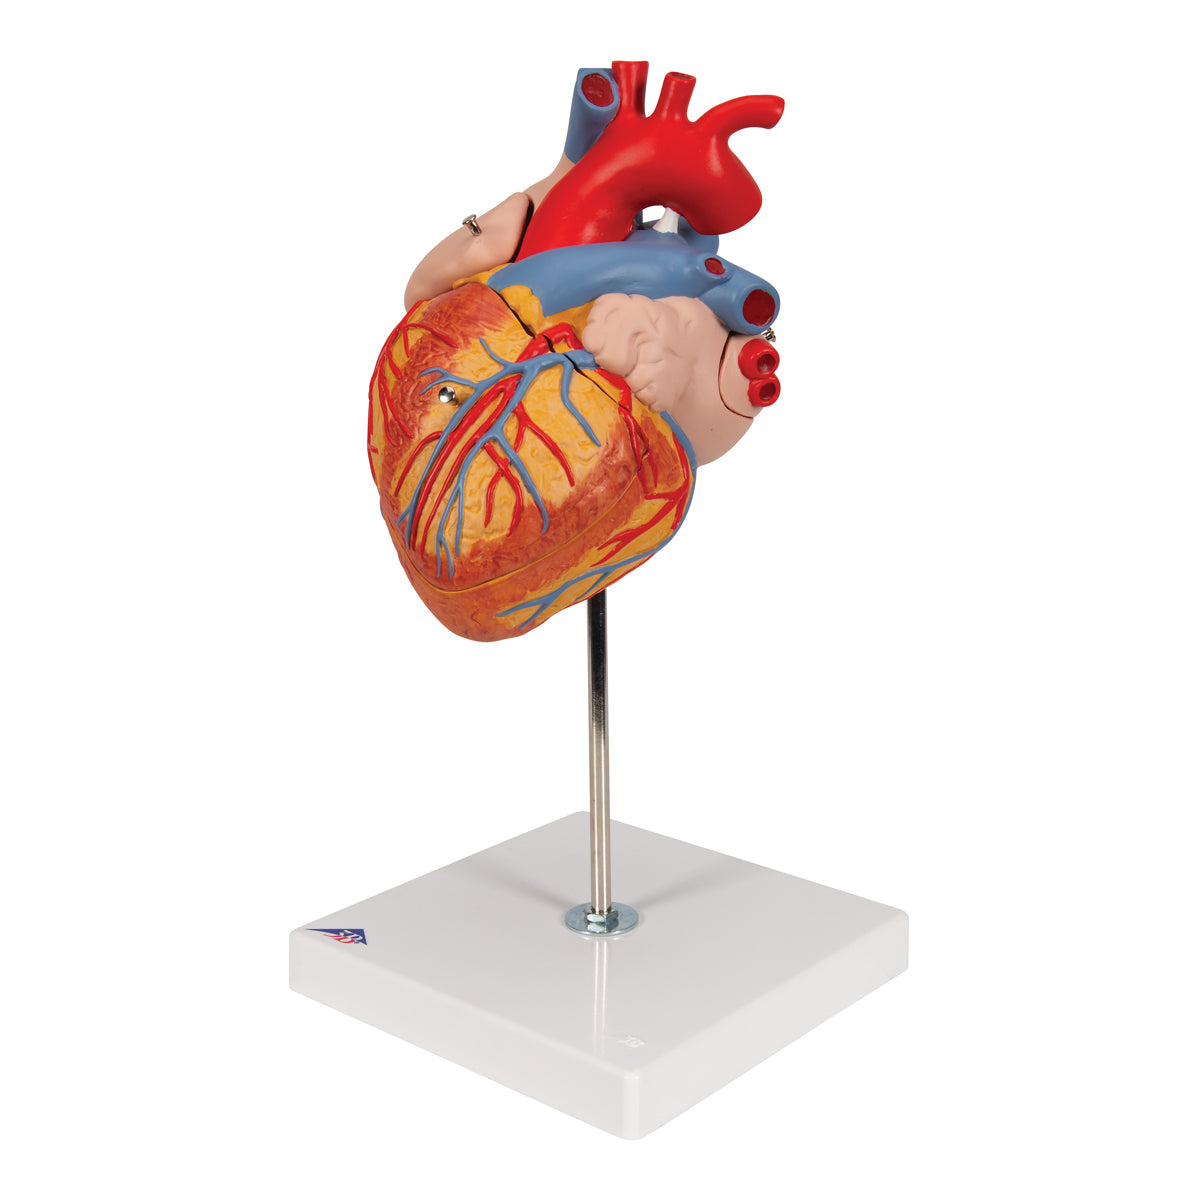 Hand painted heart model that has been enlarged